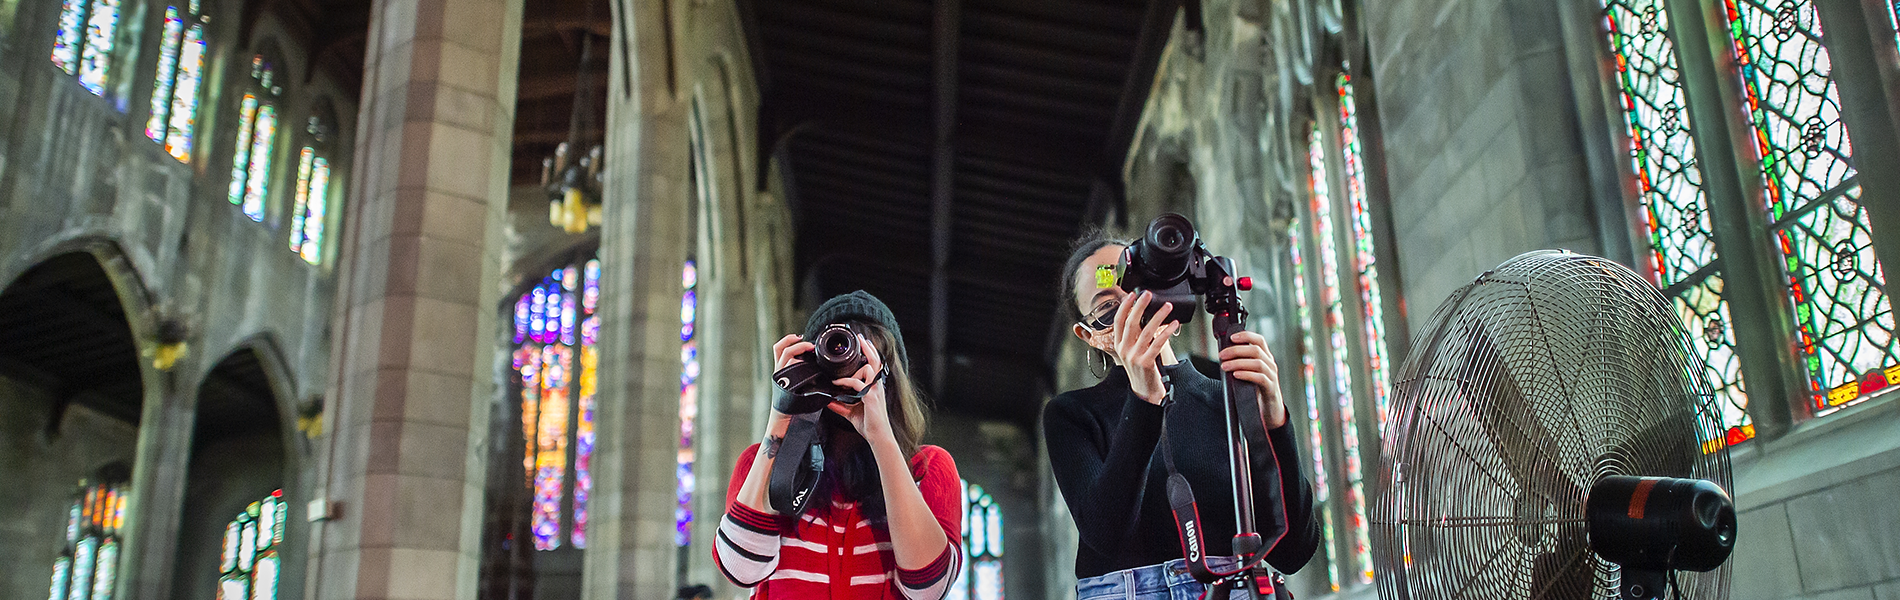  Two young women point their cameras upward inside a neo-Gothic church.